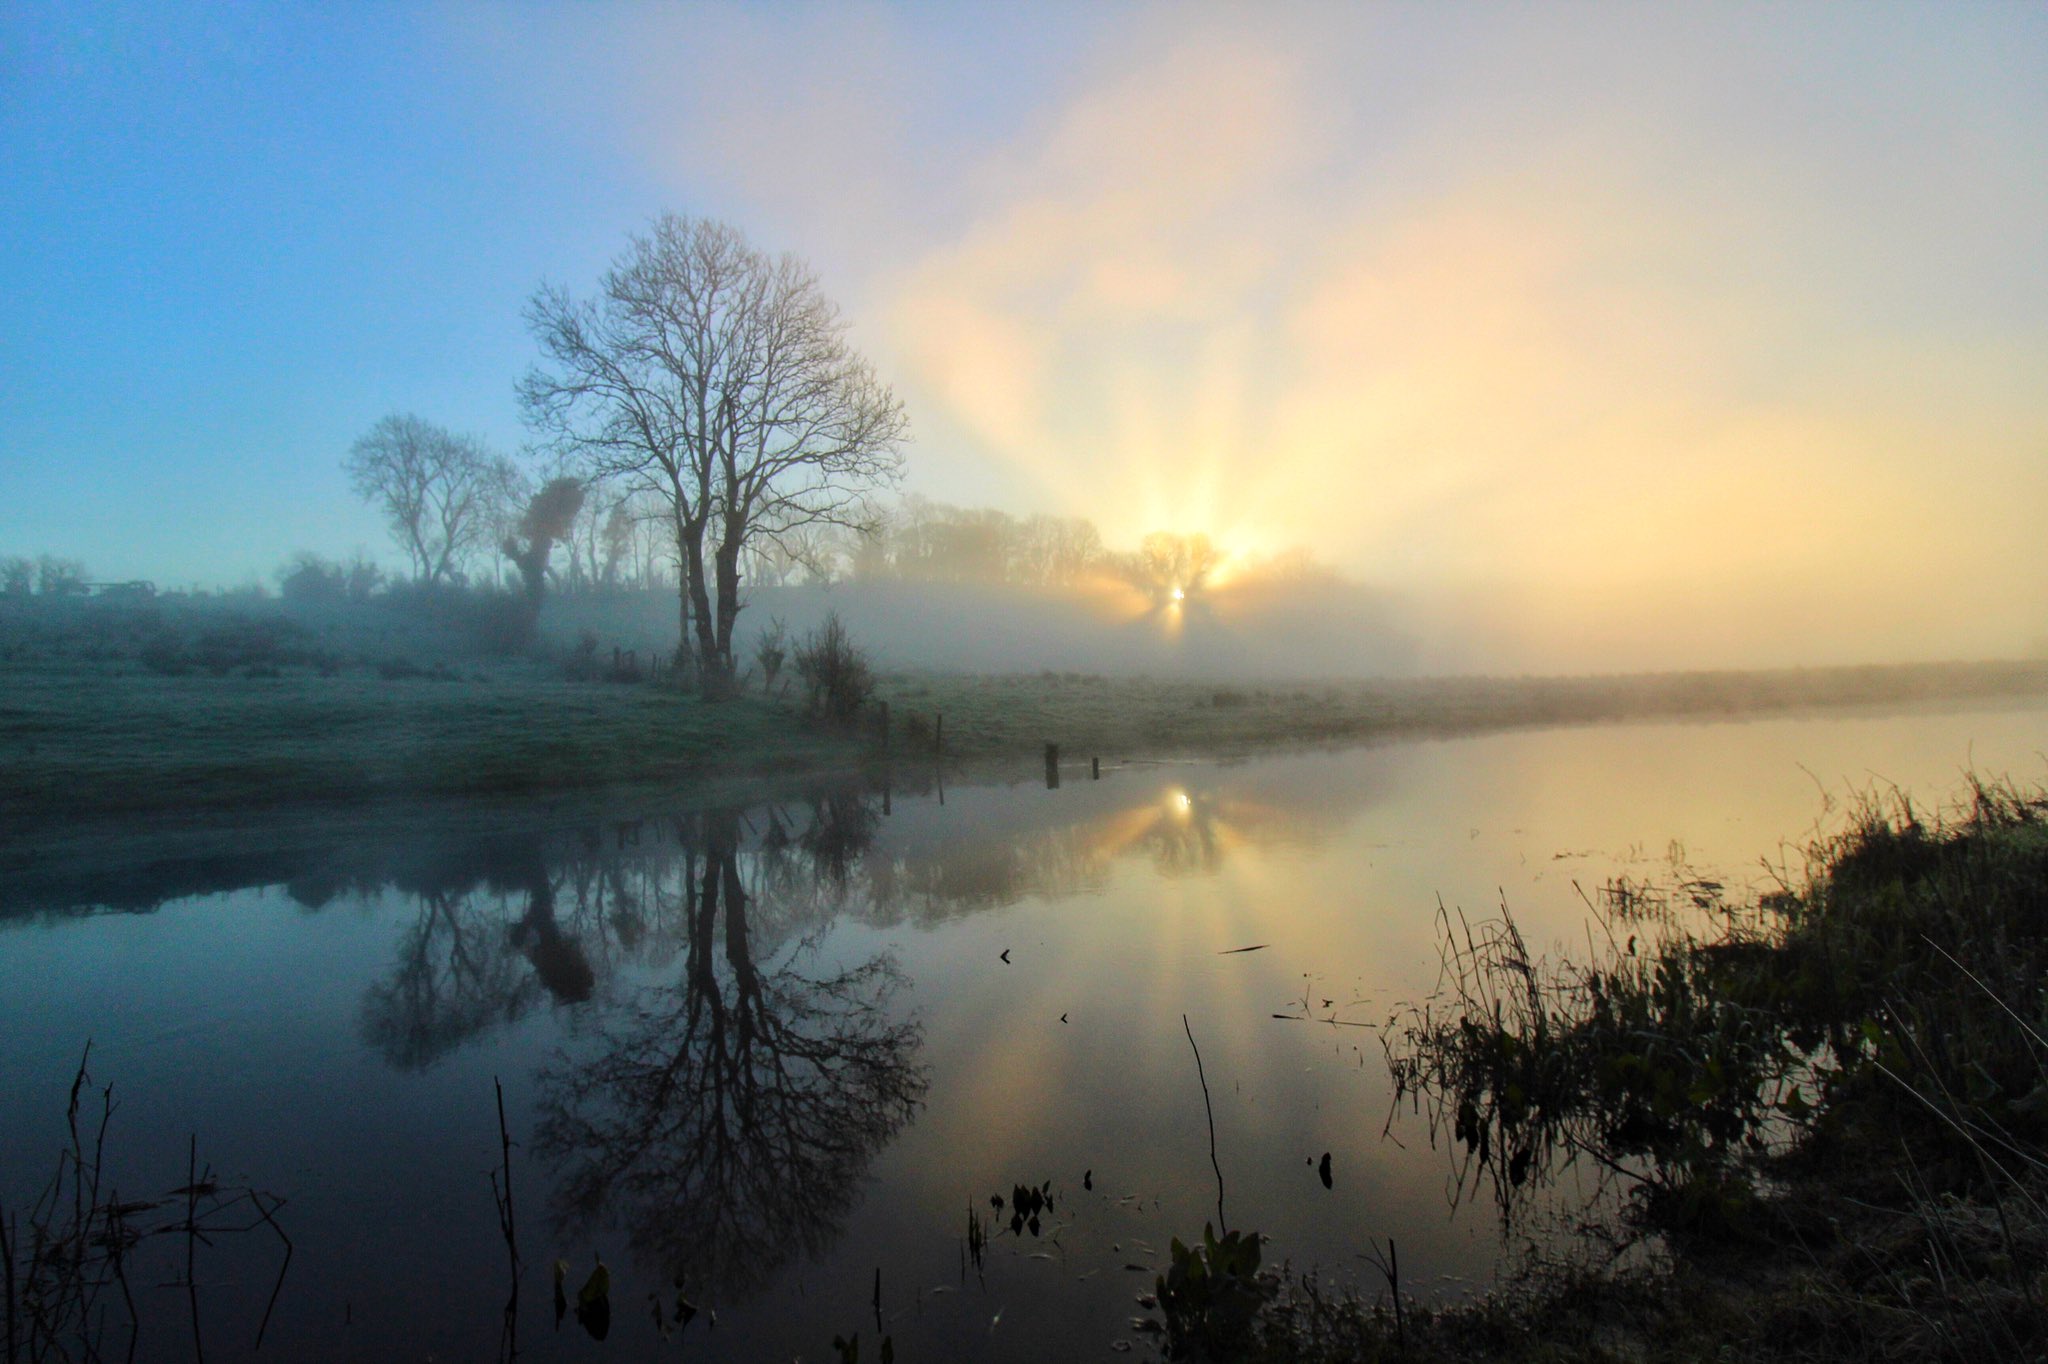 3rd Place Sunrise through the mist by Tom Gilroy photography @tomgilroy33